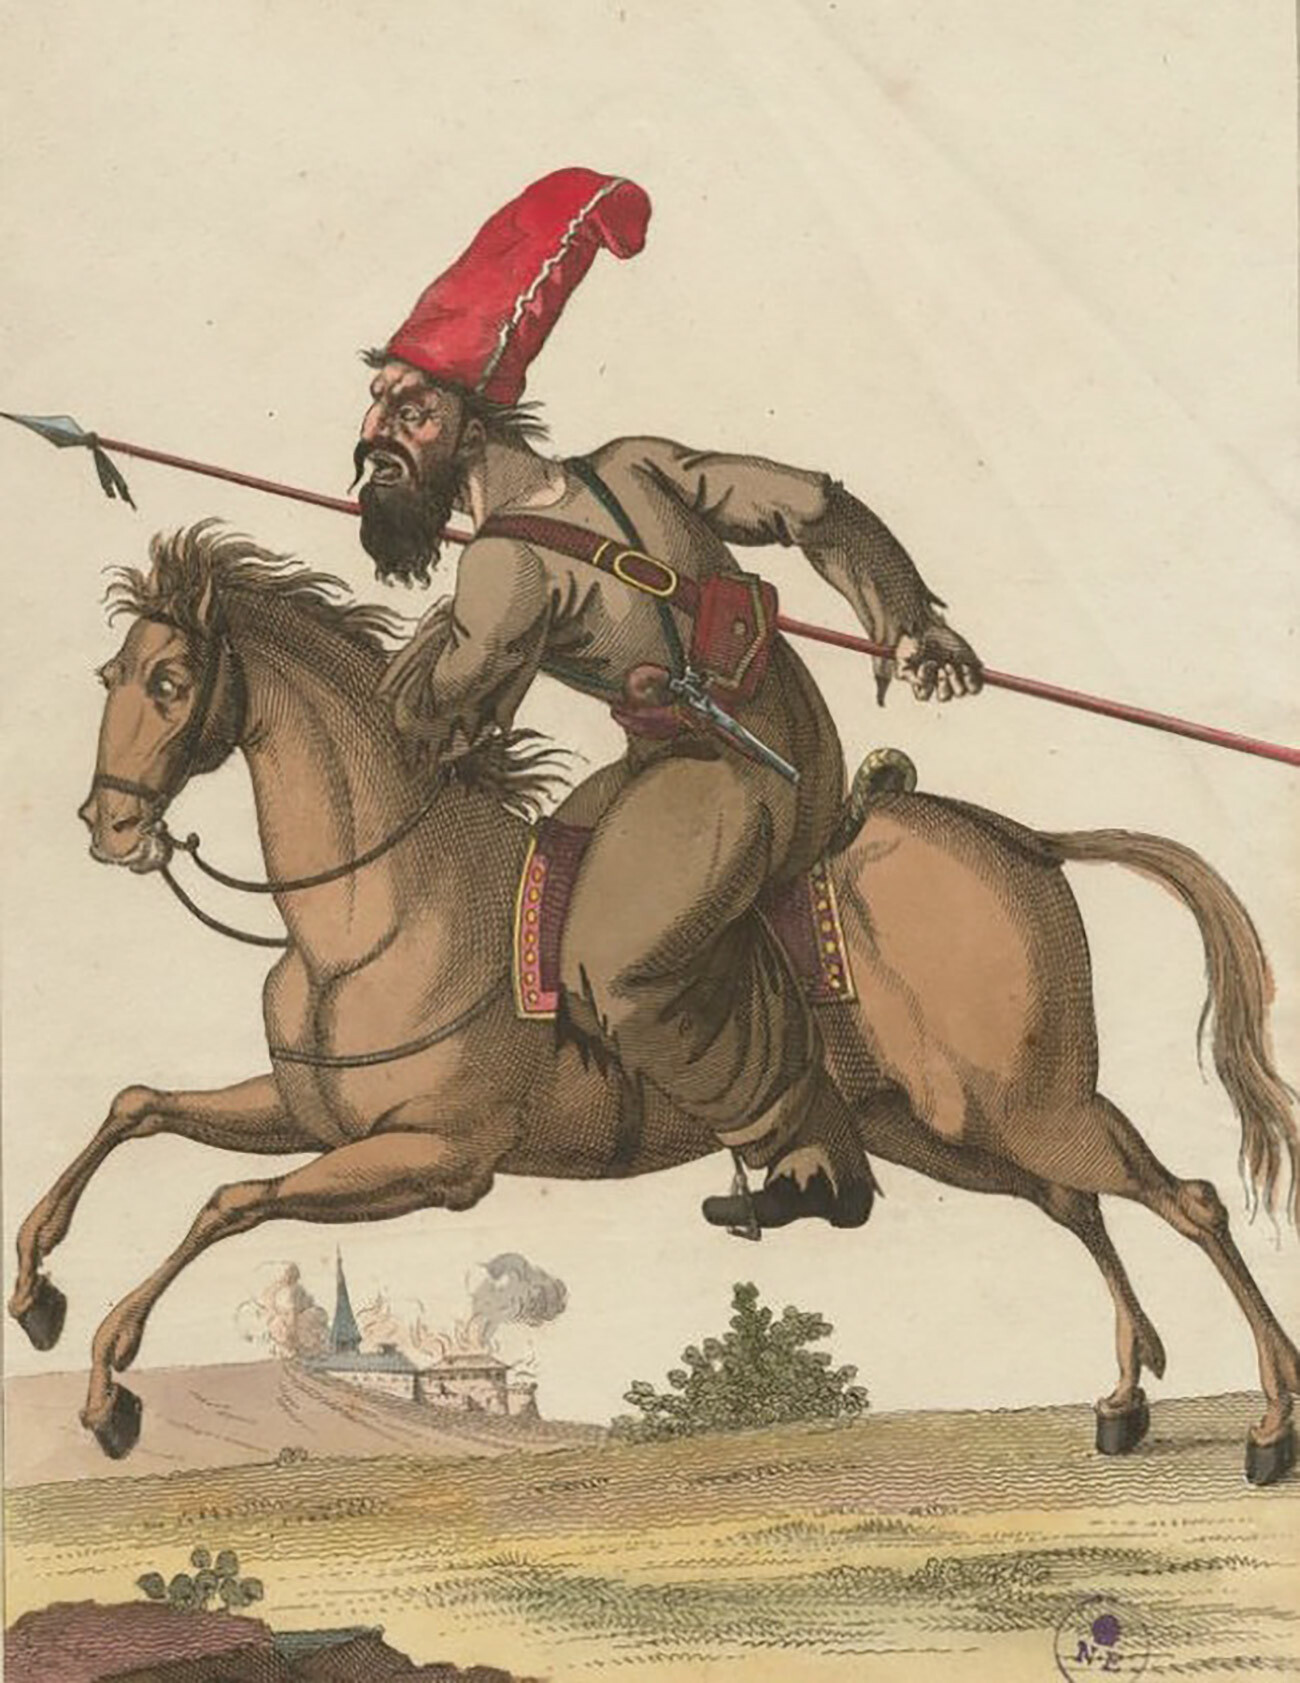 Siberian Cossack. Caricature by Jean Publishers, 1814.